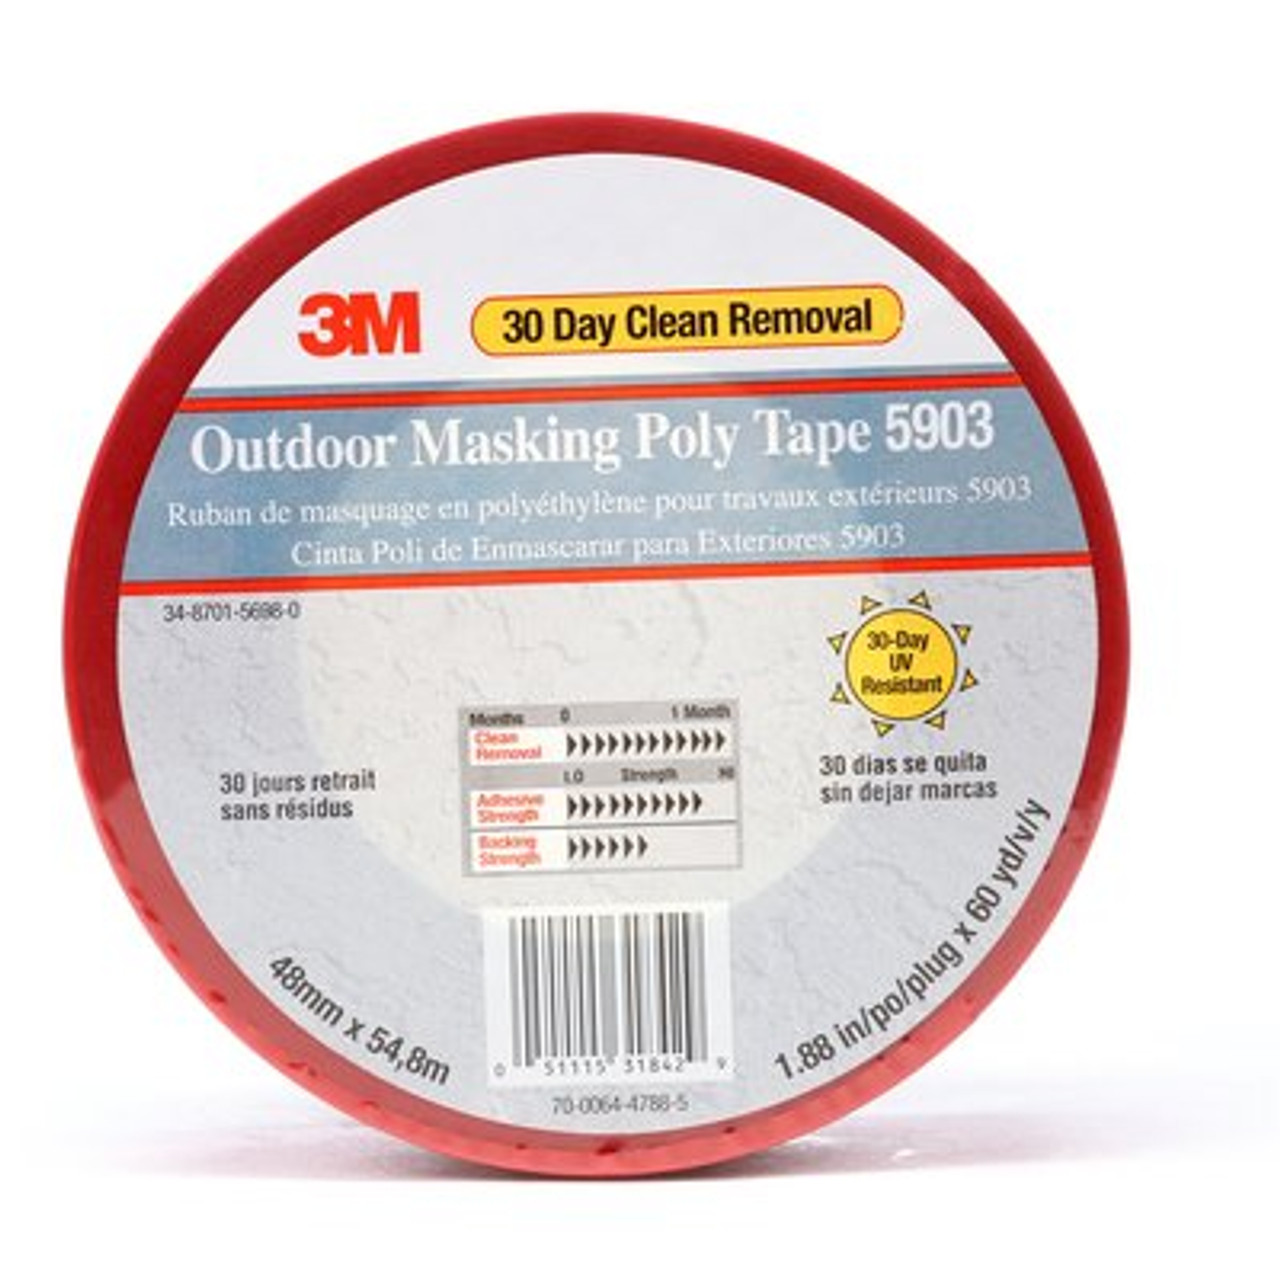 3M™ Outdoor Masking Poly Tape 5903, Red, 48 mm x 54.8 m, 7.5 mil IW